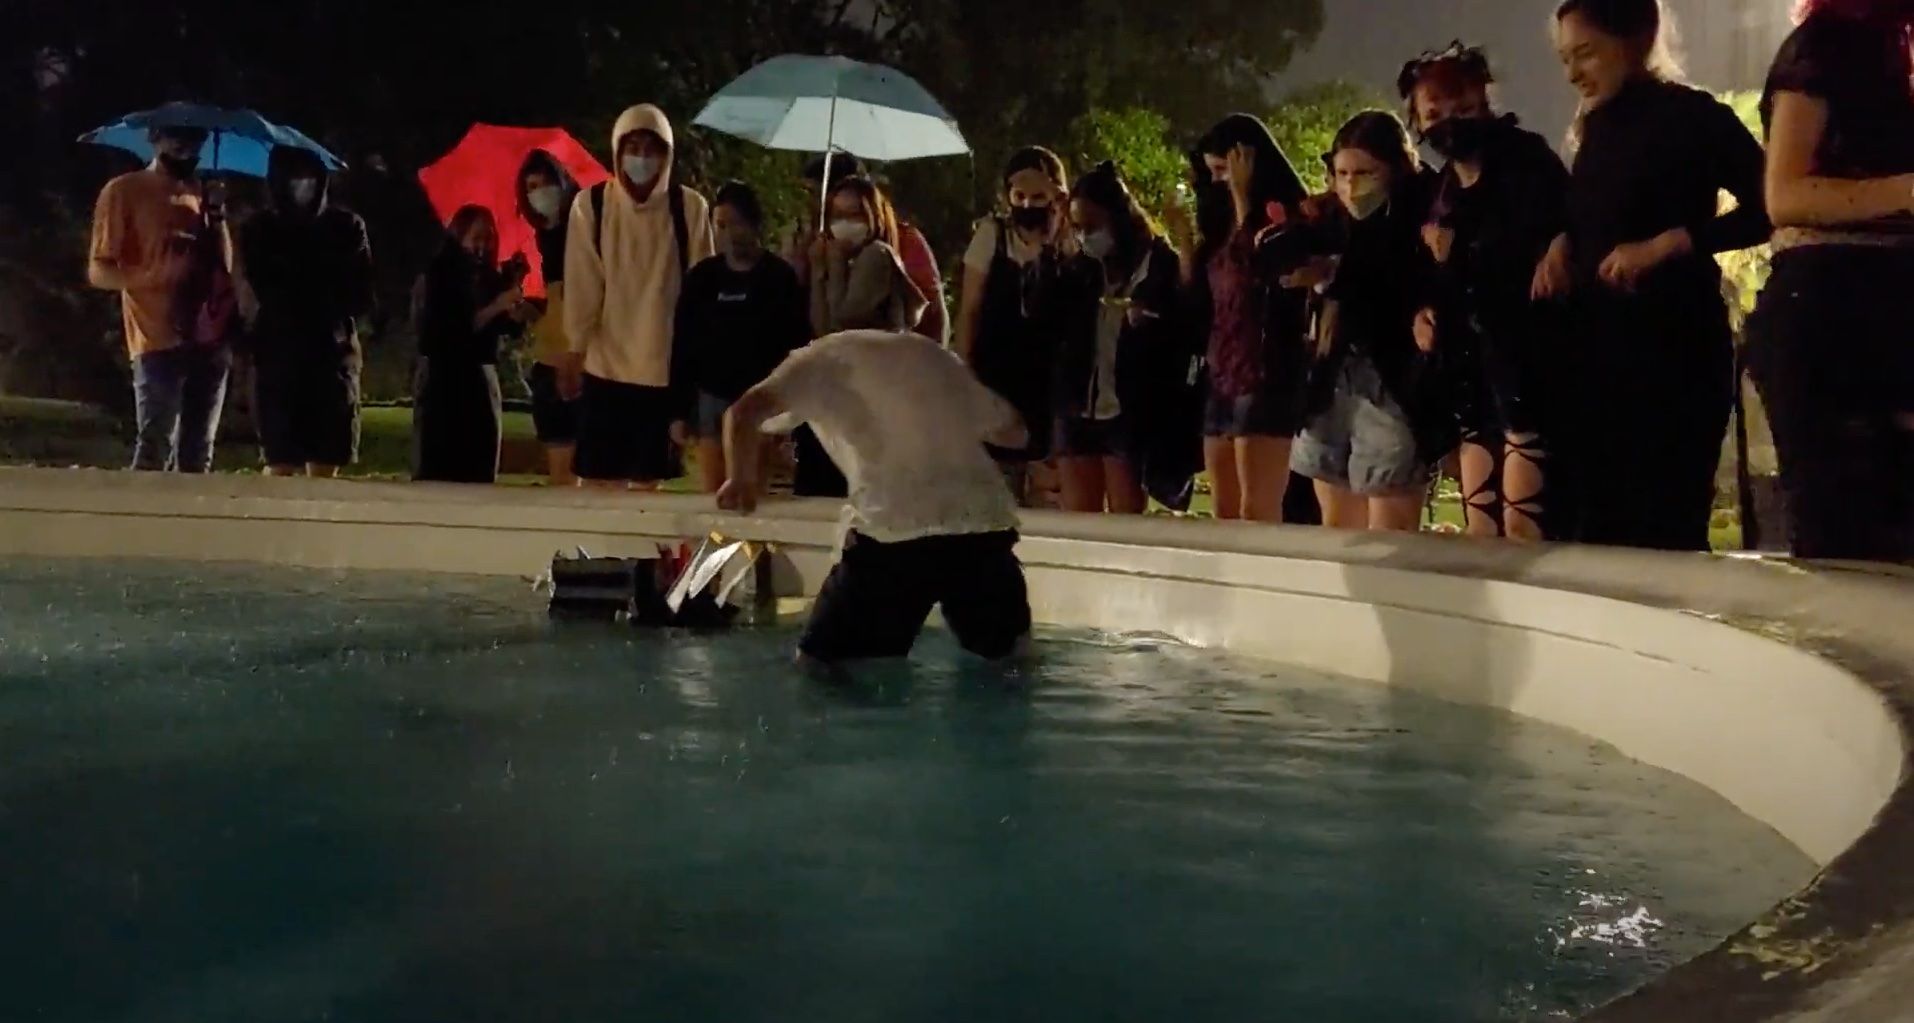 A maker club committee member jumping into a fountain to test out some duct-tape boats